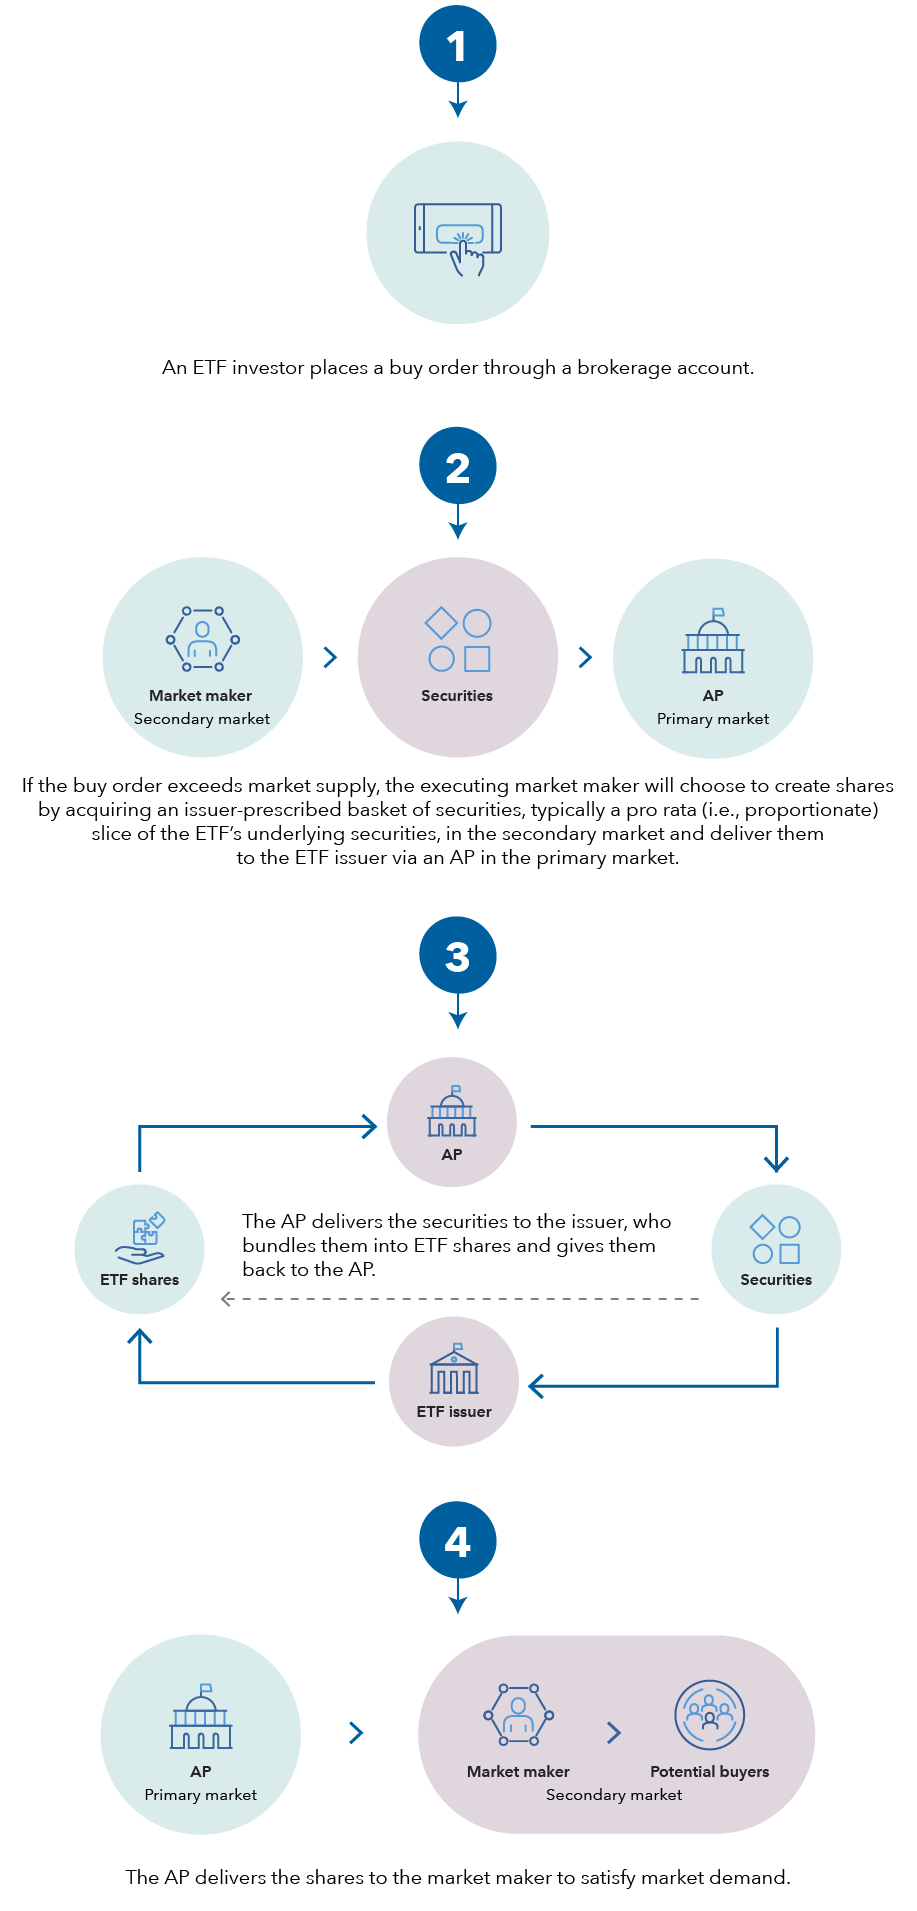 A infographic of the ETF creation process, which allows the number of ETF shares to increase as needed, depending on market demand. First, an ETF places a buy order through a brokerage account. If the buy order exceeds the market supply, the executing market maker will choose to create shares by acquiring an issuer-prescribed basket of securities, typically a pro-rata (i.e., proportionate) slice of the ETF’s underlying securities, in the secondary market and deliver them to the ETF issuer via an AP in the primary market. Then, the AP delivers the securities to the issuer who bundles them into ETF shares and gives them back to the AP. Finally, the AP delivers the shares to the market maker to satisfy demand.